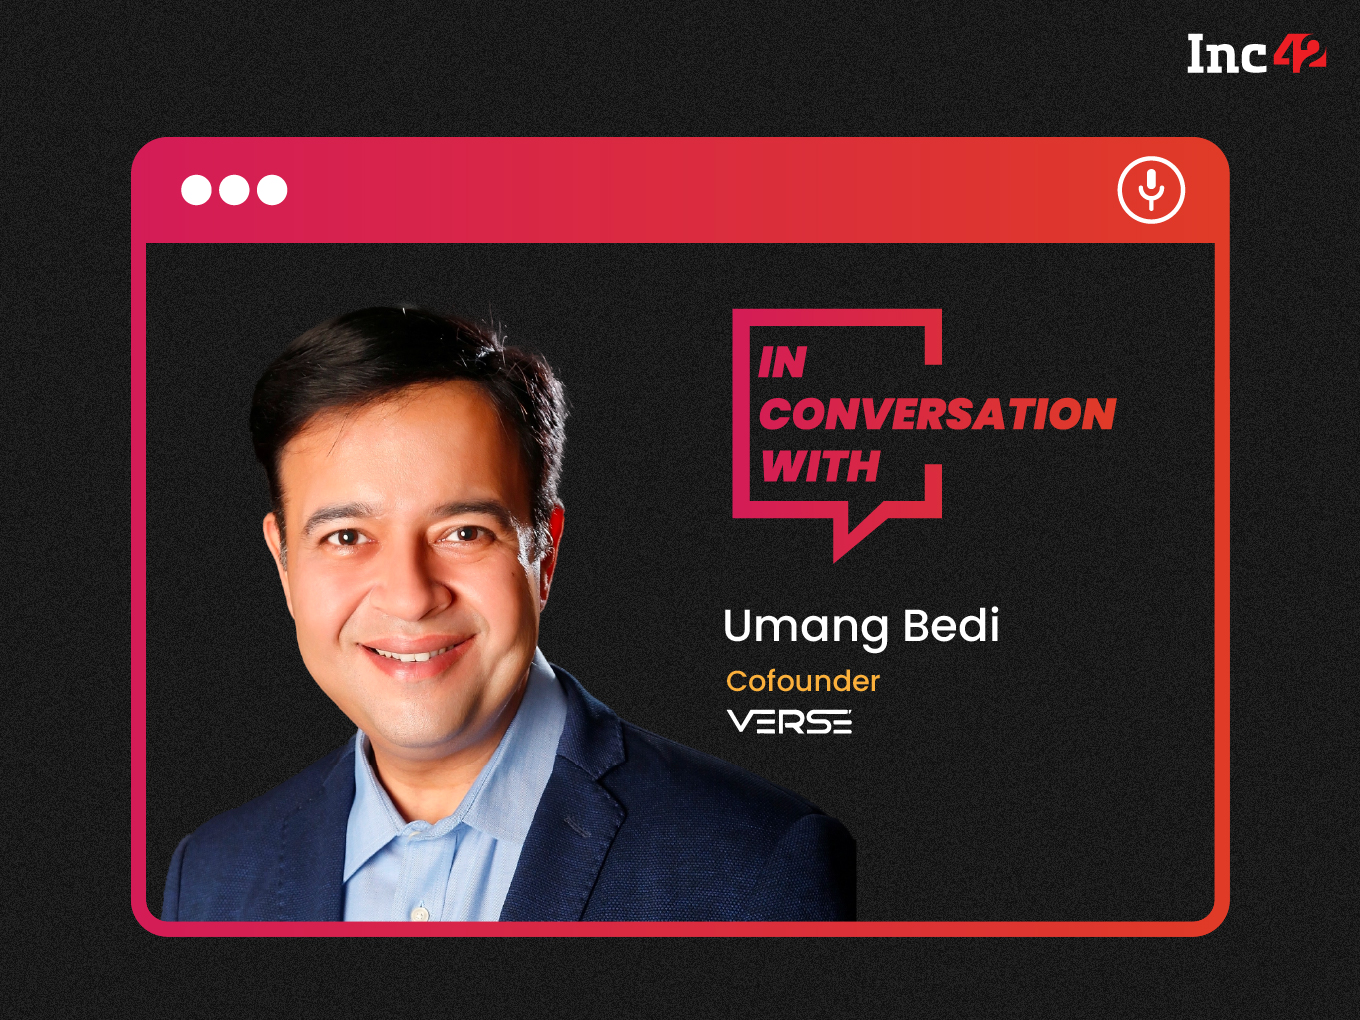 Vernacular Advertising Can Help Brands Engage With Users Effectively And Authentically: Josh’s Umang Bedi - Inc42 (Picture 1)